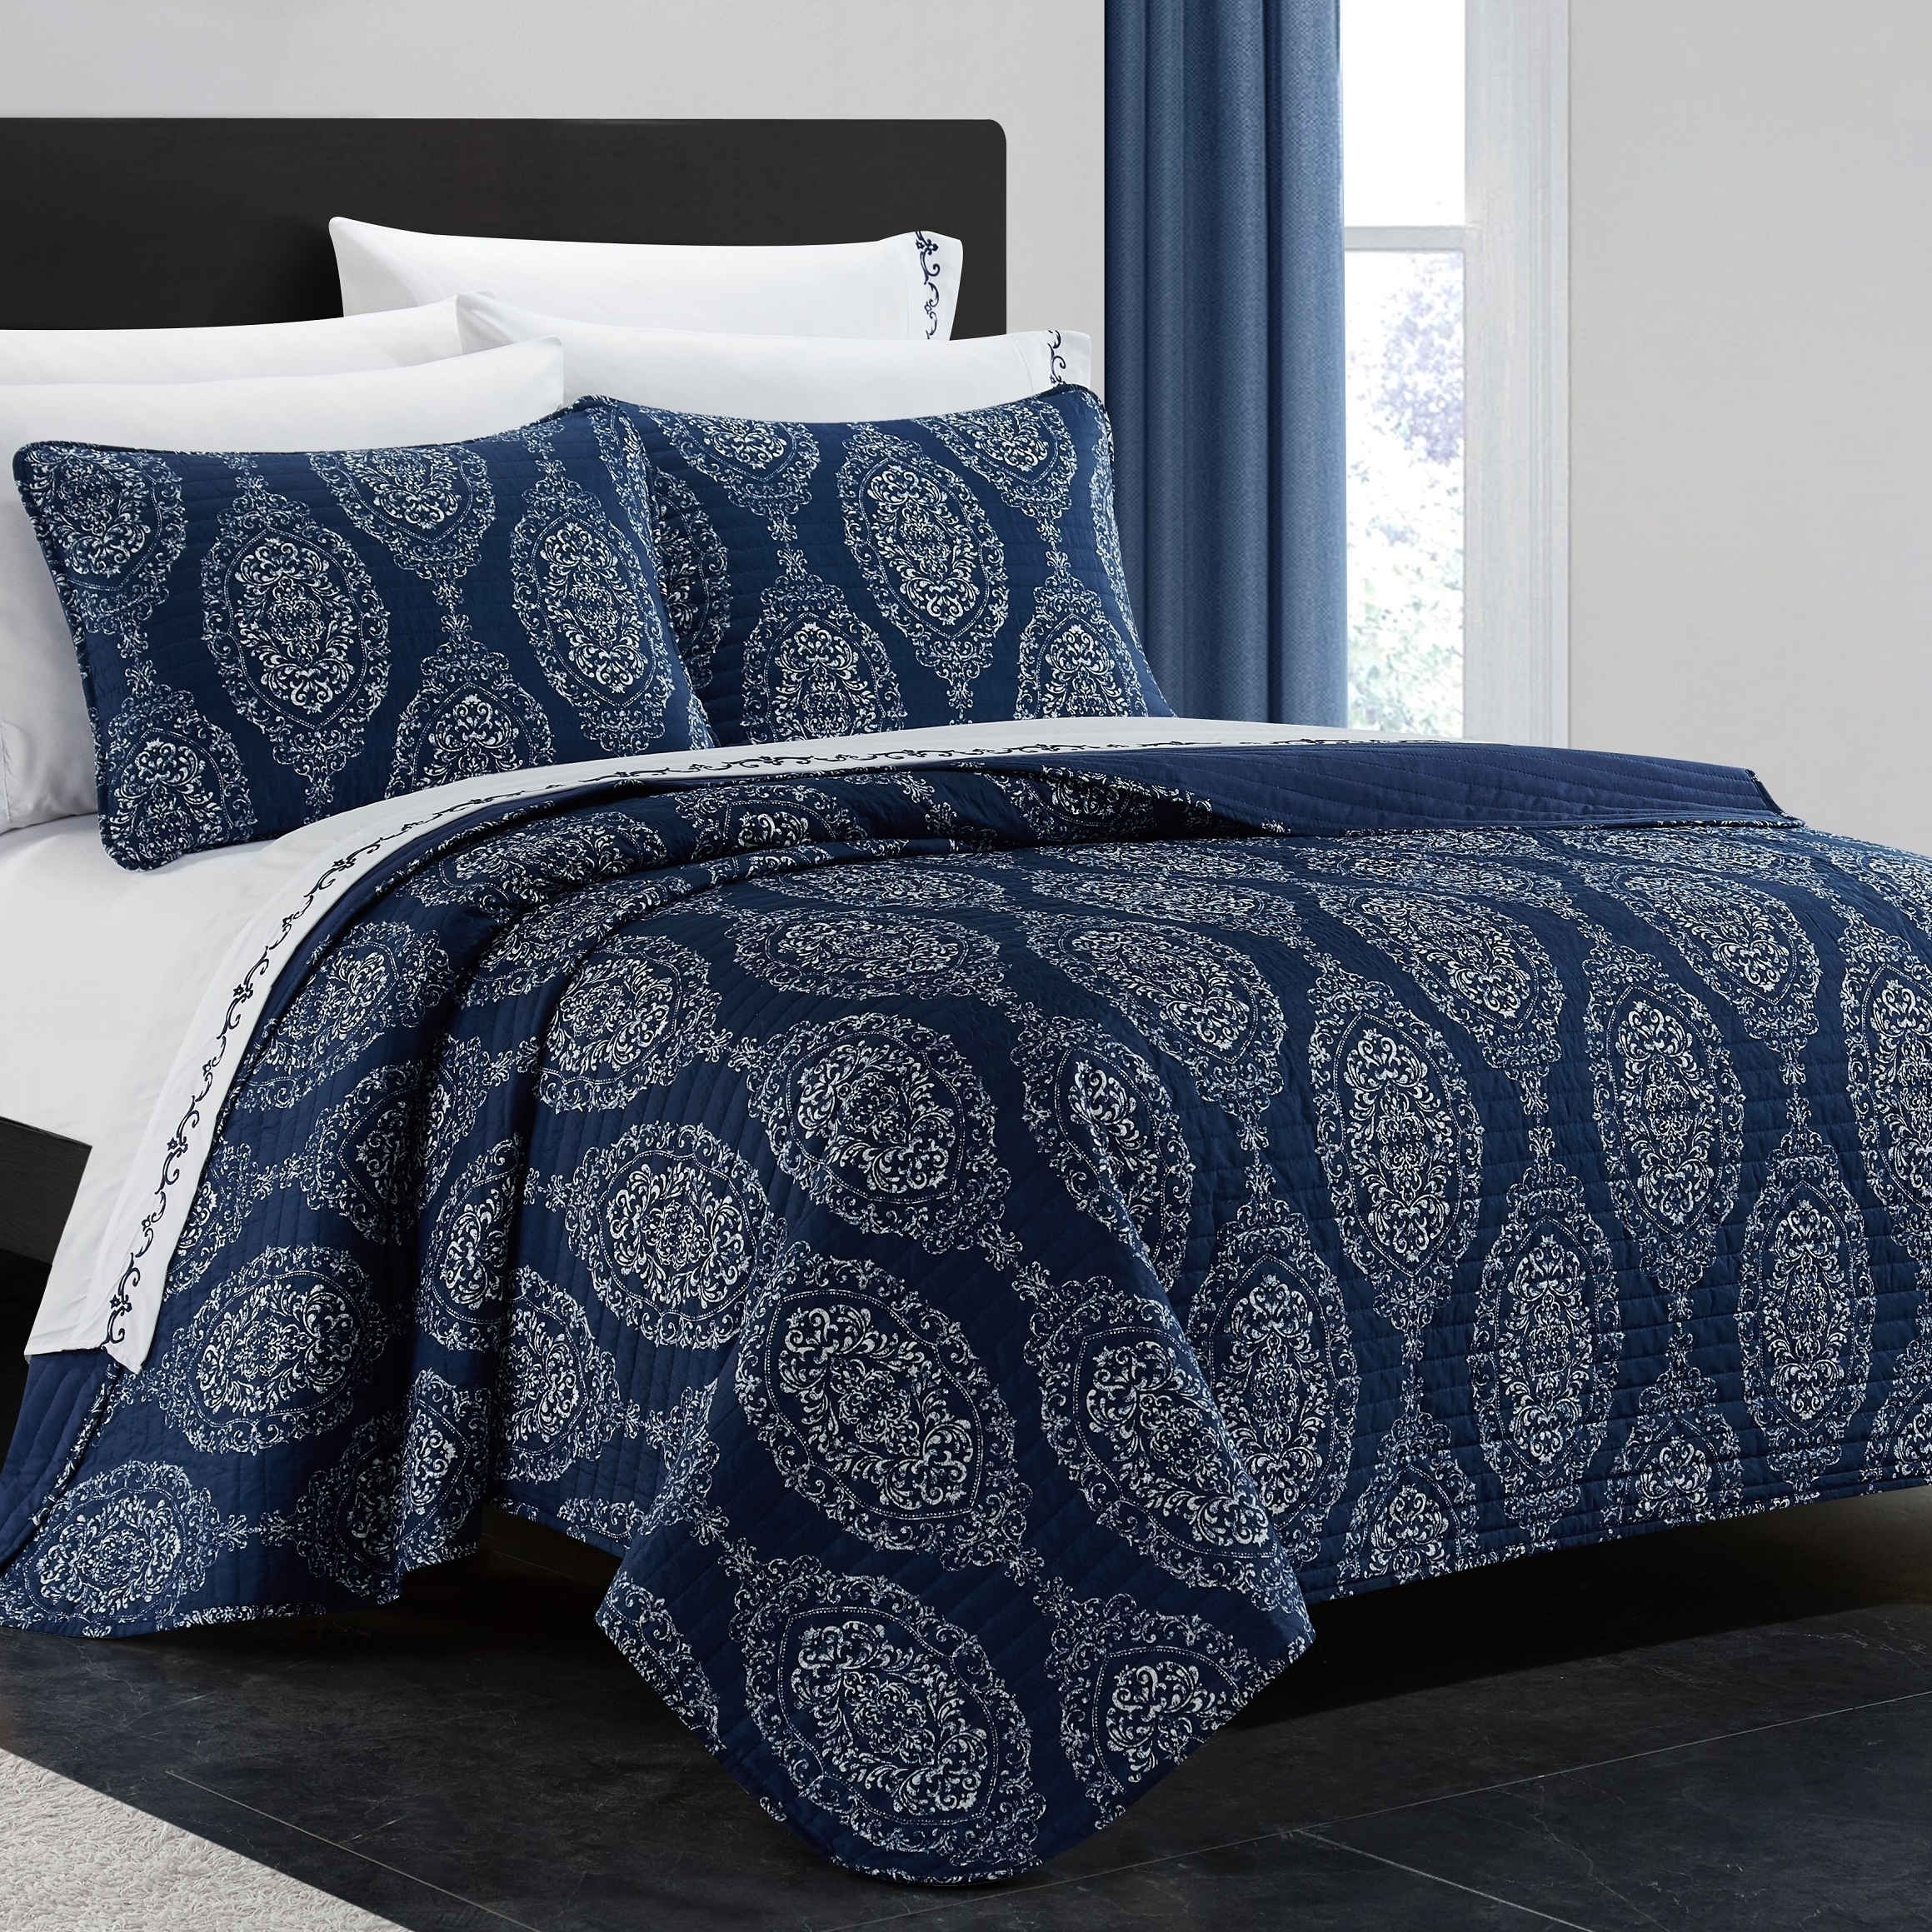 9 Or 6 Piece Quilt Set Medallion Or Floral Pattern Print Reversible Bed In A Bag - Navy, King